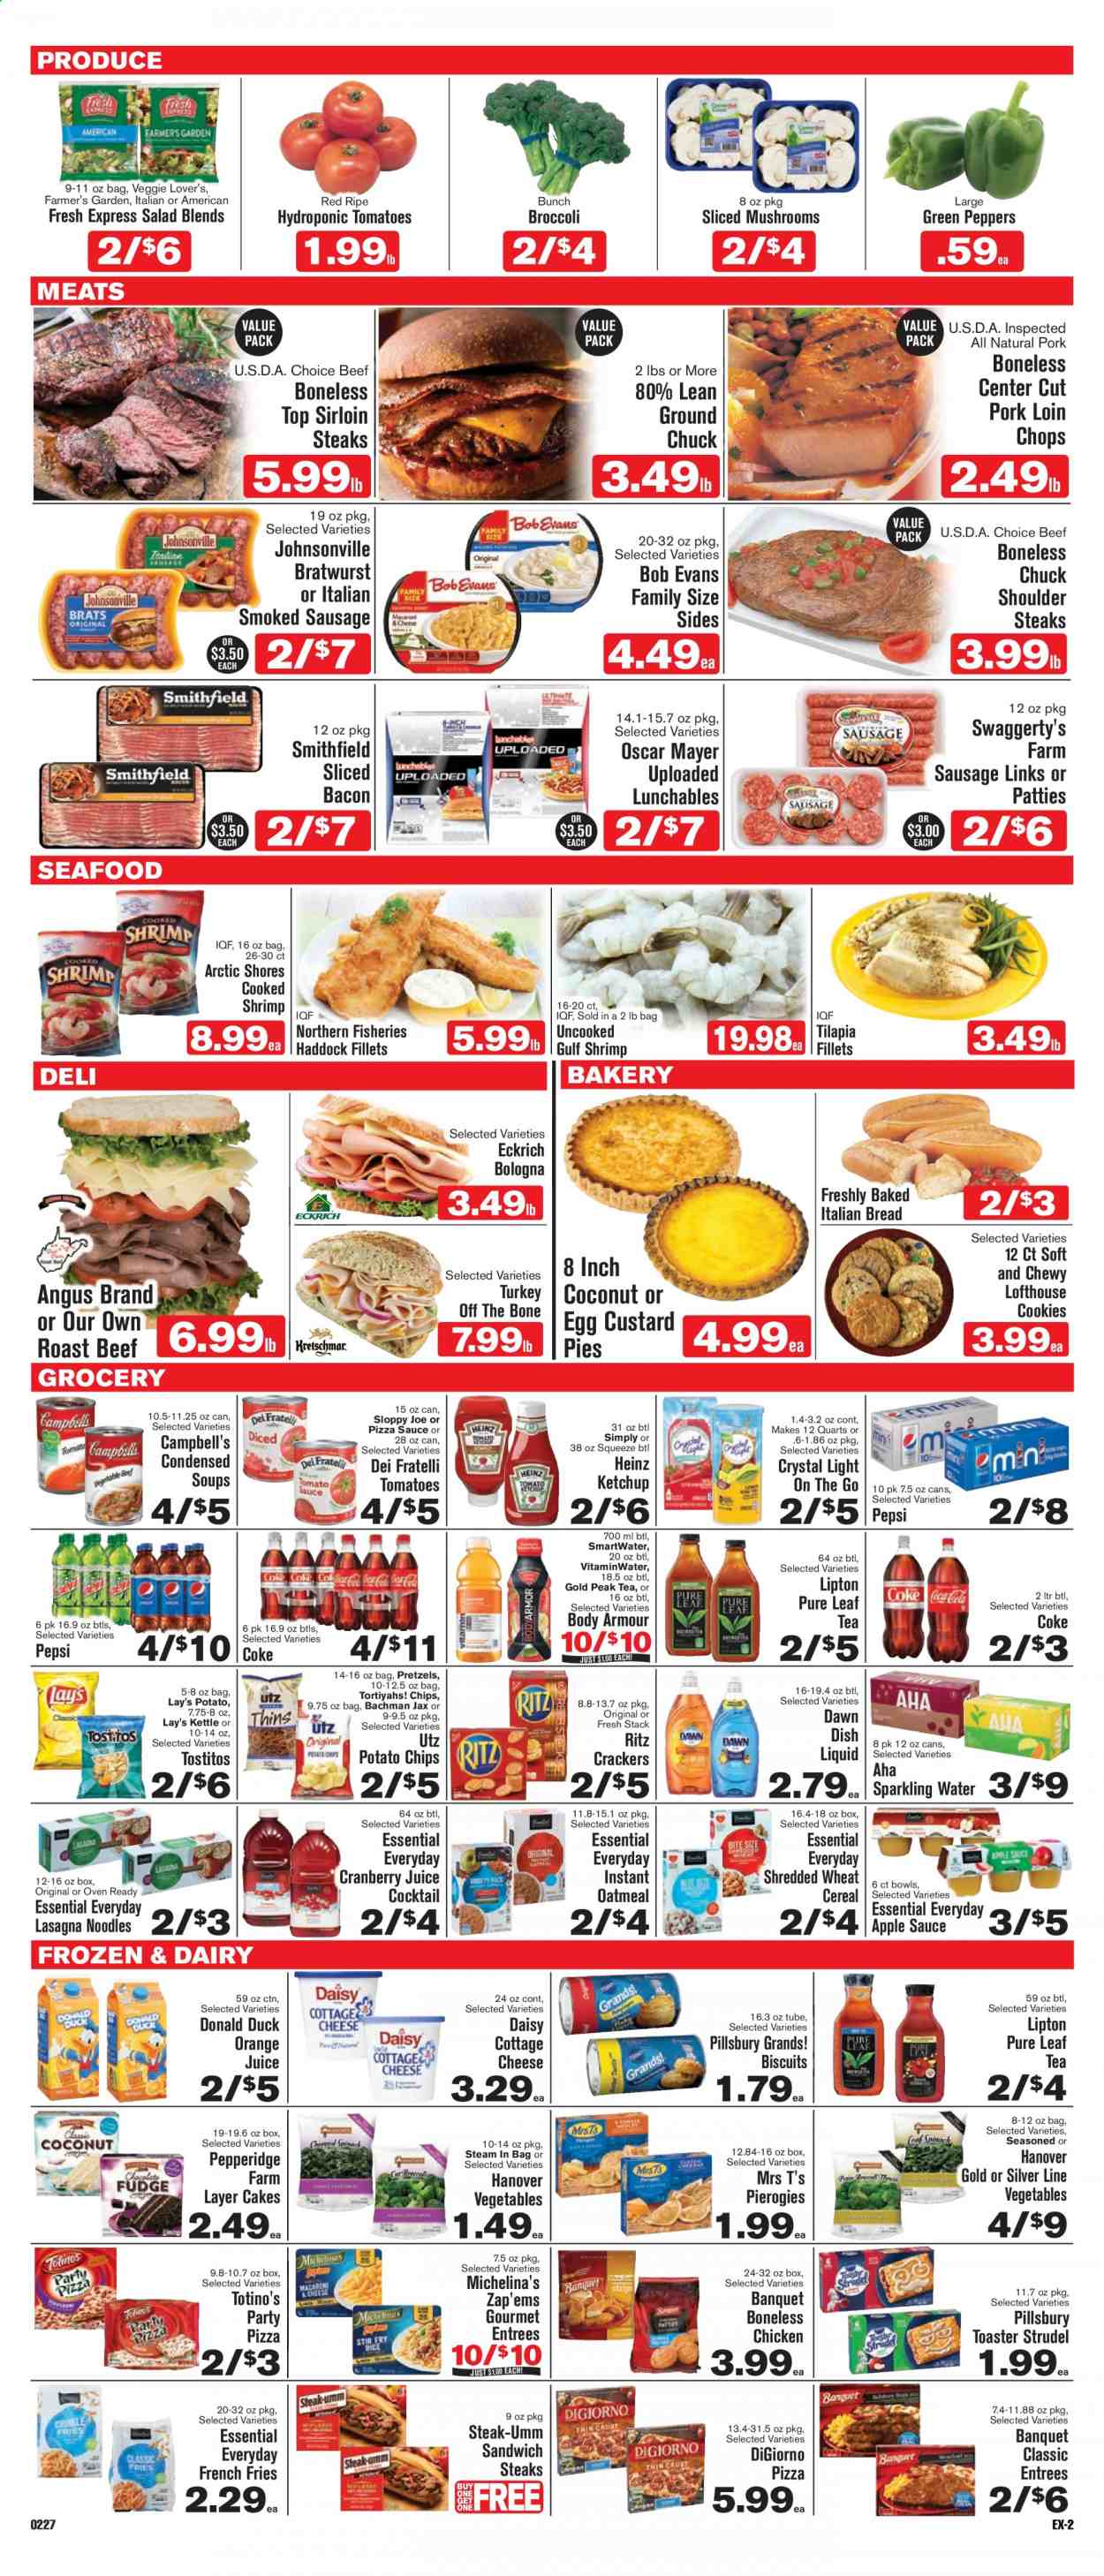 thumbnail - Shop ‘n Save Express Flyer - 02/27/2021 - 04/05/2021 - Sales products - mushrooms, bread, pretzels, Johnsonville, cake, strudel, coconut, beef meat, ground chuck, steak, roast beef, sirloin steak, Bob Evans, pork loin, pork meat, tilapia, haddock, seafood, shrimps, Arctic Shores, Campbell's, pizza, sandwich, salad, Pillsbury, lasagna meal, Lunchables, bacon, bologna sausage, Oscar Mayer, bratwurst, sausage, smoked sausage, cottage cheese, cheese, custard, potato fries, french fries, cookies, fudge, crackers, biscuit, RITZ, Lay’s, Thins, Tostitos, oatmeal, Heinz, cereals, noodles, ketchup, apple sauce, Coca-Cola, cranberry juice, Pepsi, orange juice, juice, Lipton, Gold Peak Tea, sparkling water, tea, Pure Leaf. Page 2.